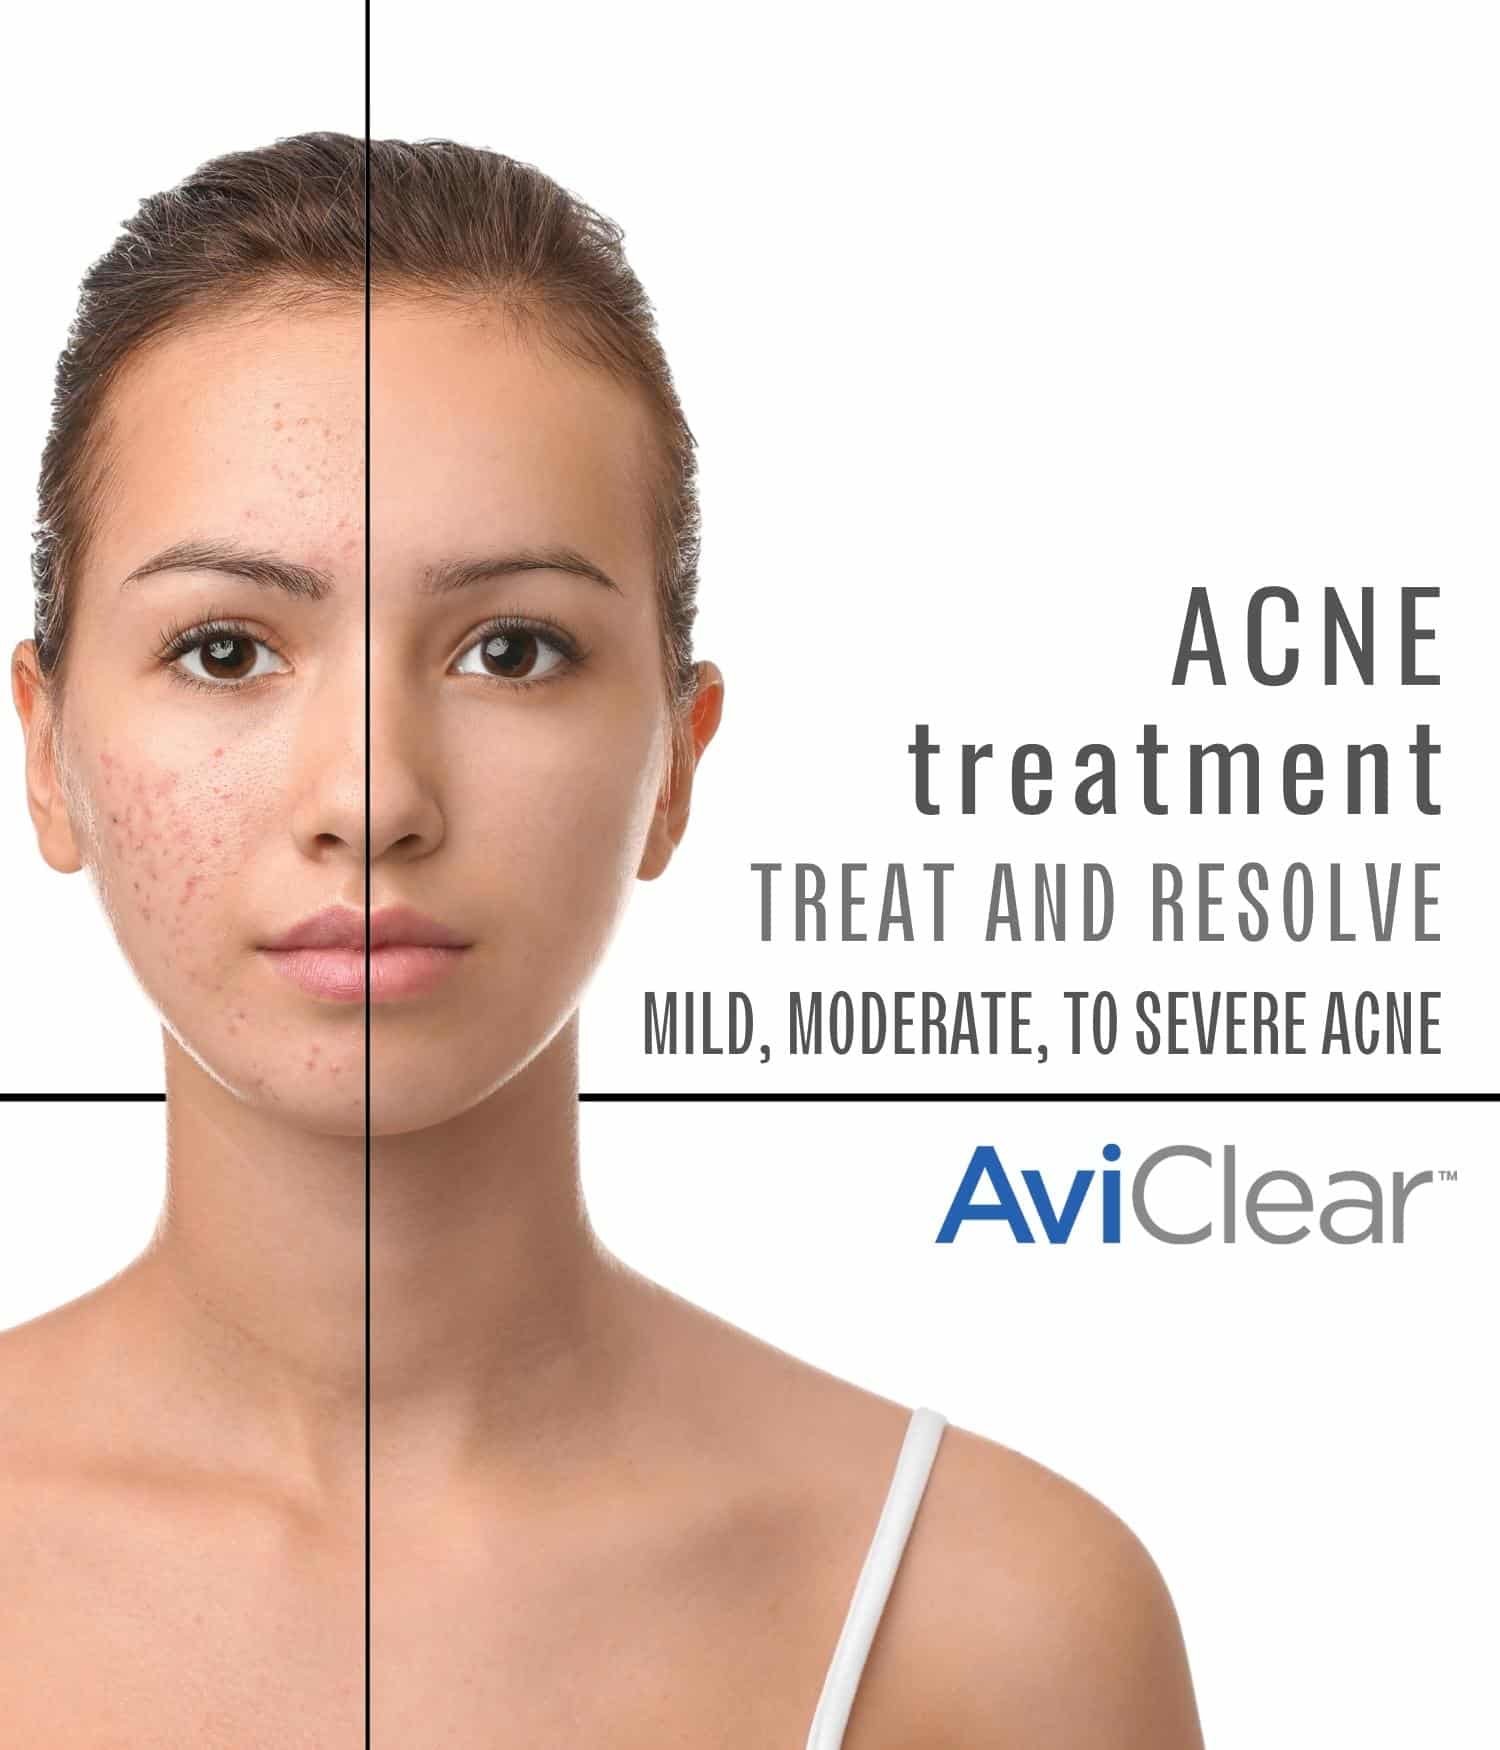 Woman's face showing before and after aviclear acne treatment benefits.